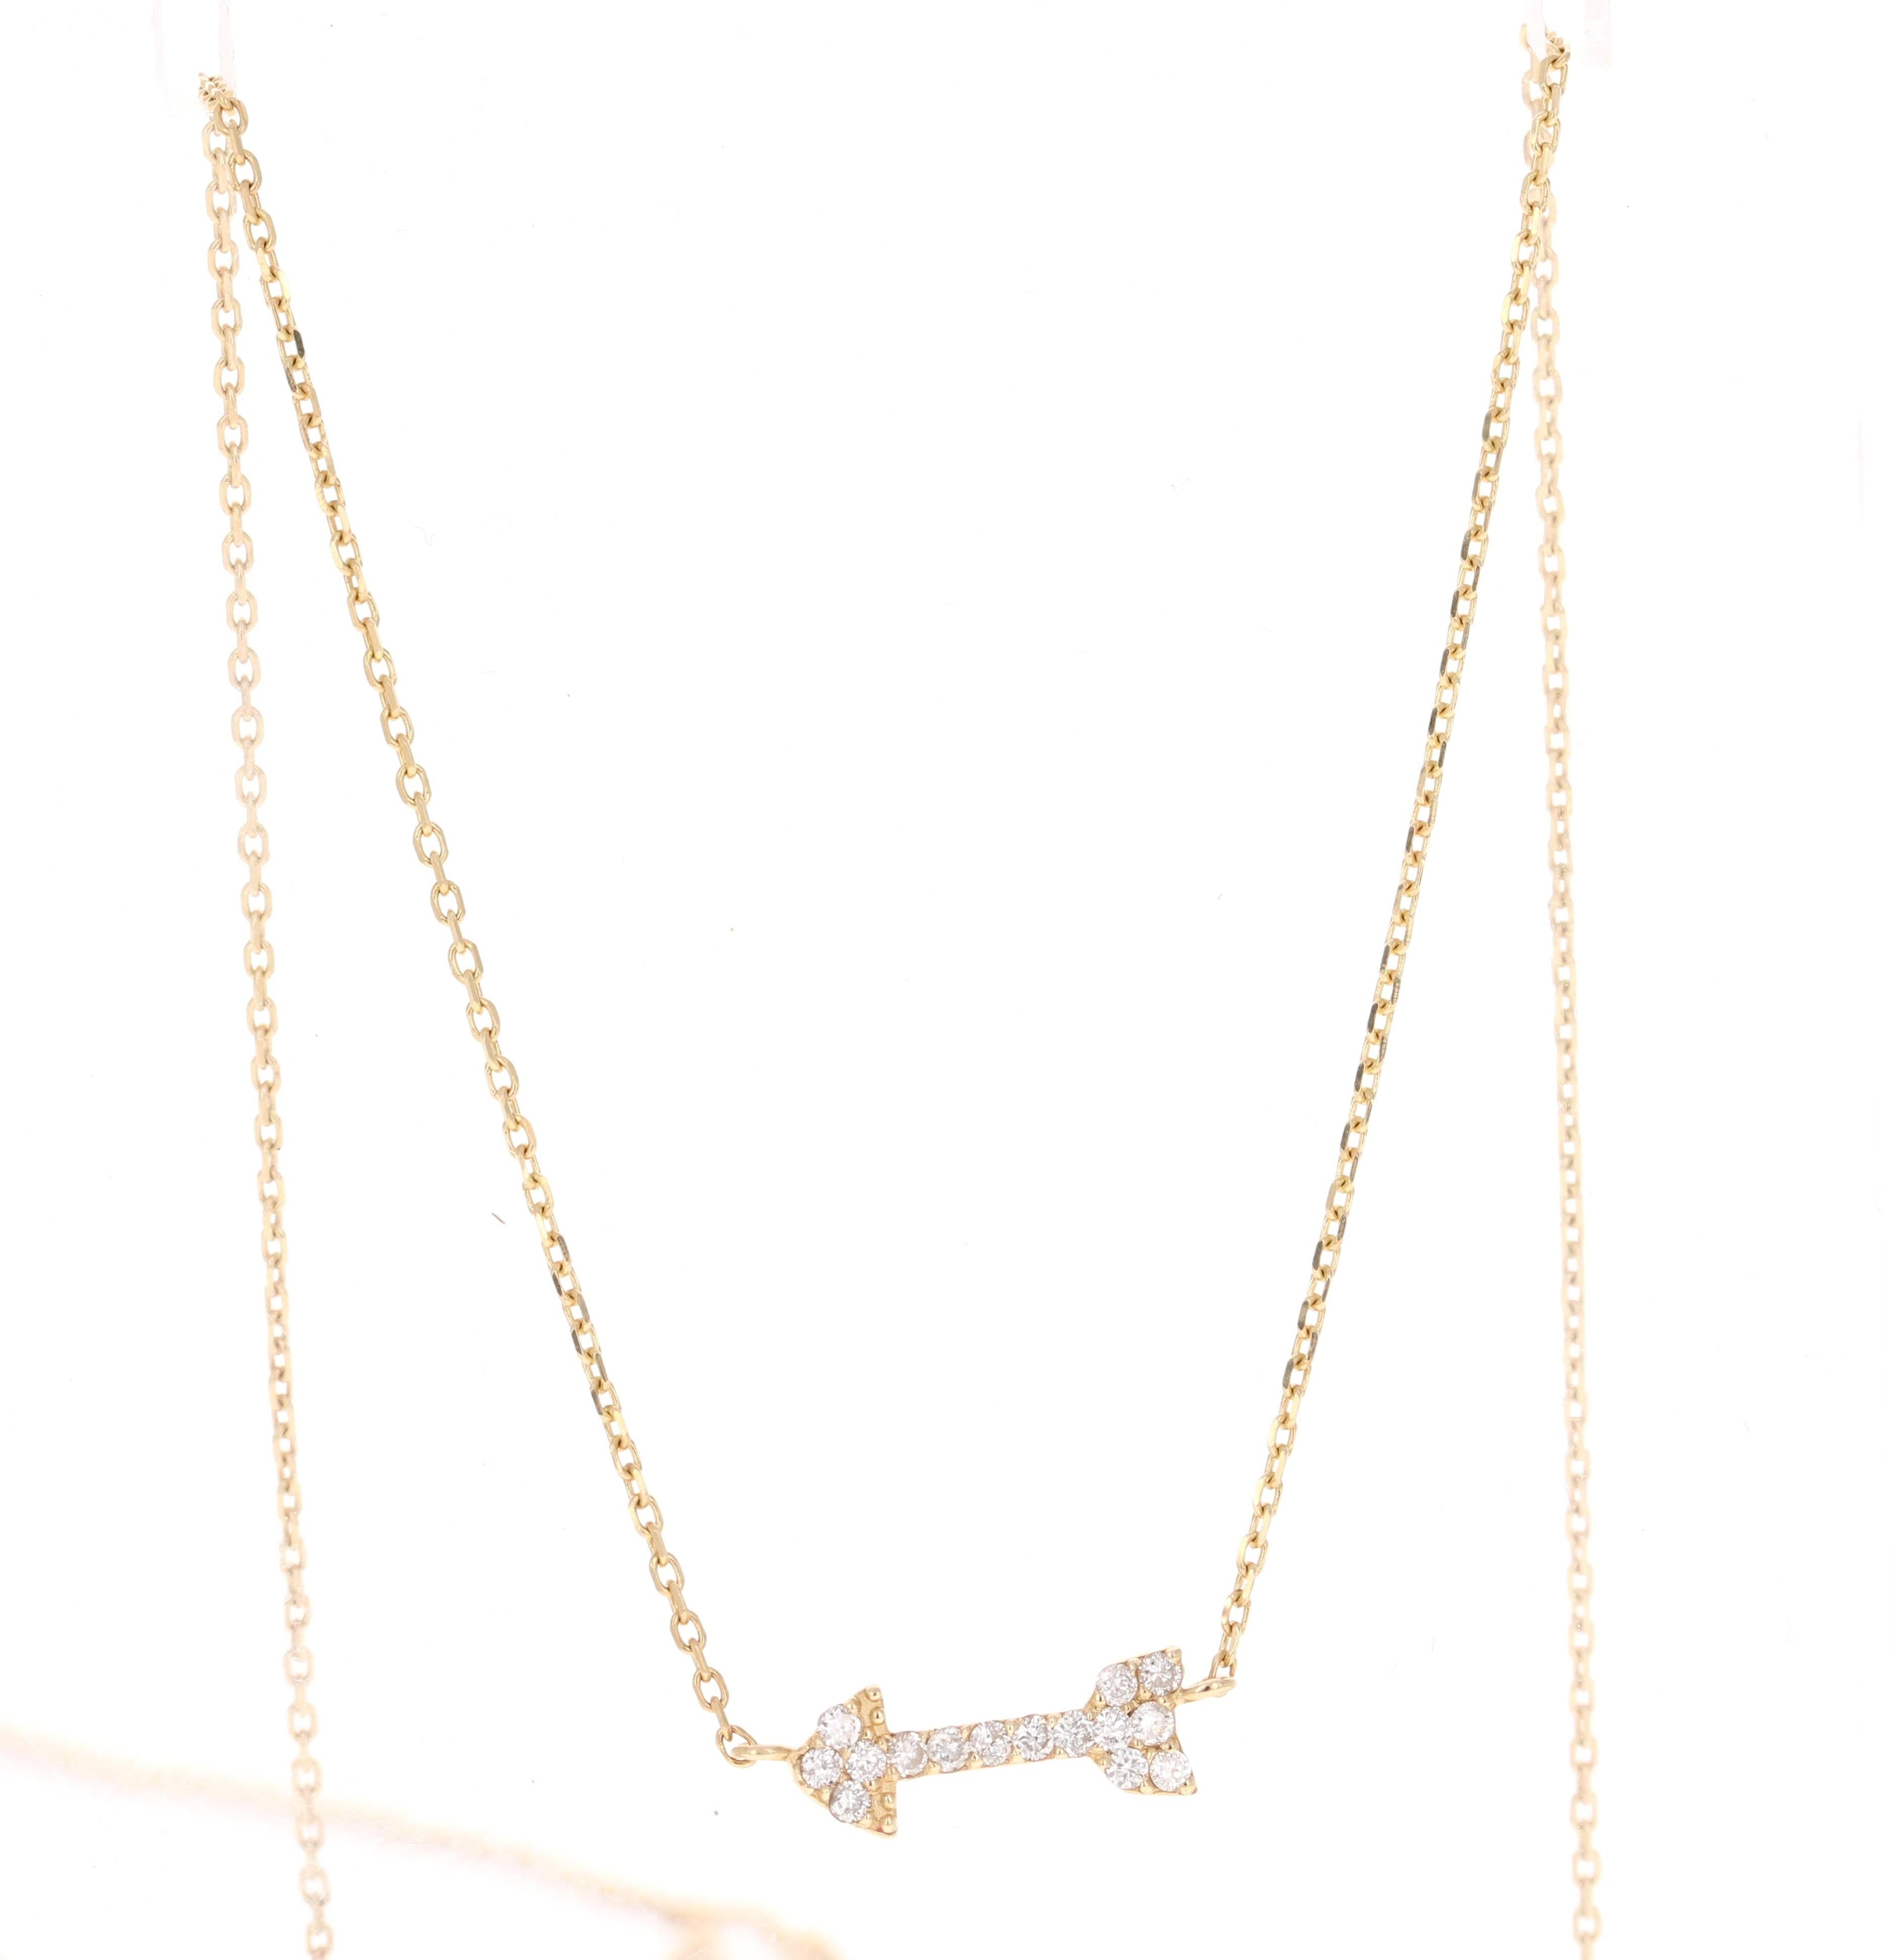 This Chain Necklace has an arrow as its shape and it has 15 Round Cut Diamonds that weigh 0.15 carats.  (Clarity: VS, Color: H) The total carat weight of the Pendant is 0.15 Carats.

It is beautifully curated in 14 Karat Yellow Gold and weighs